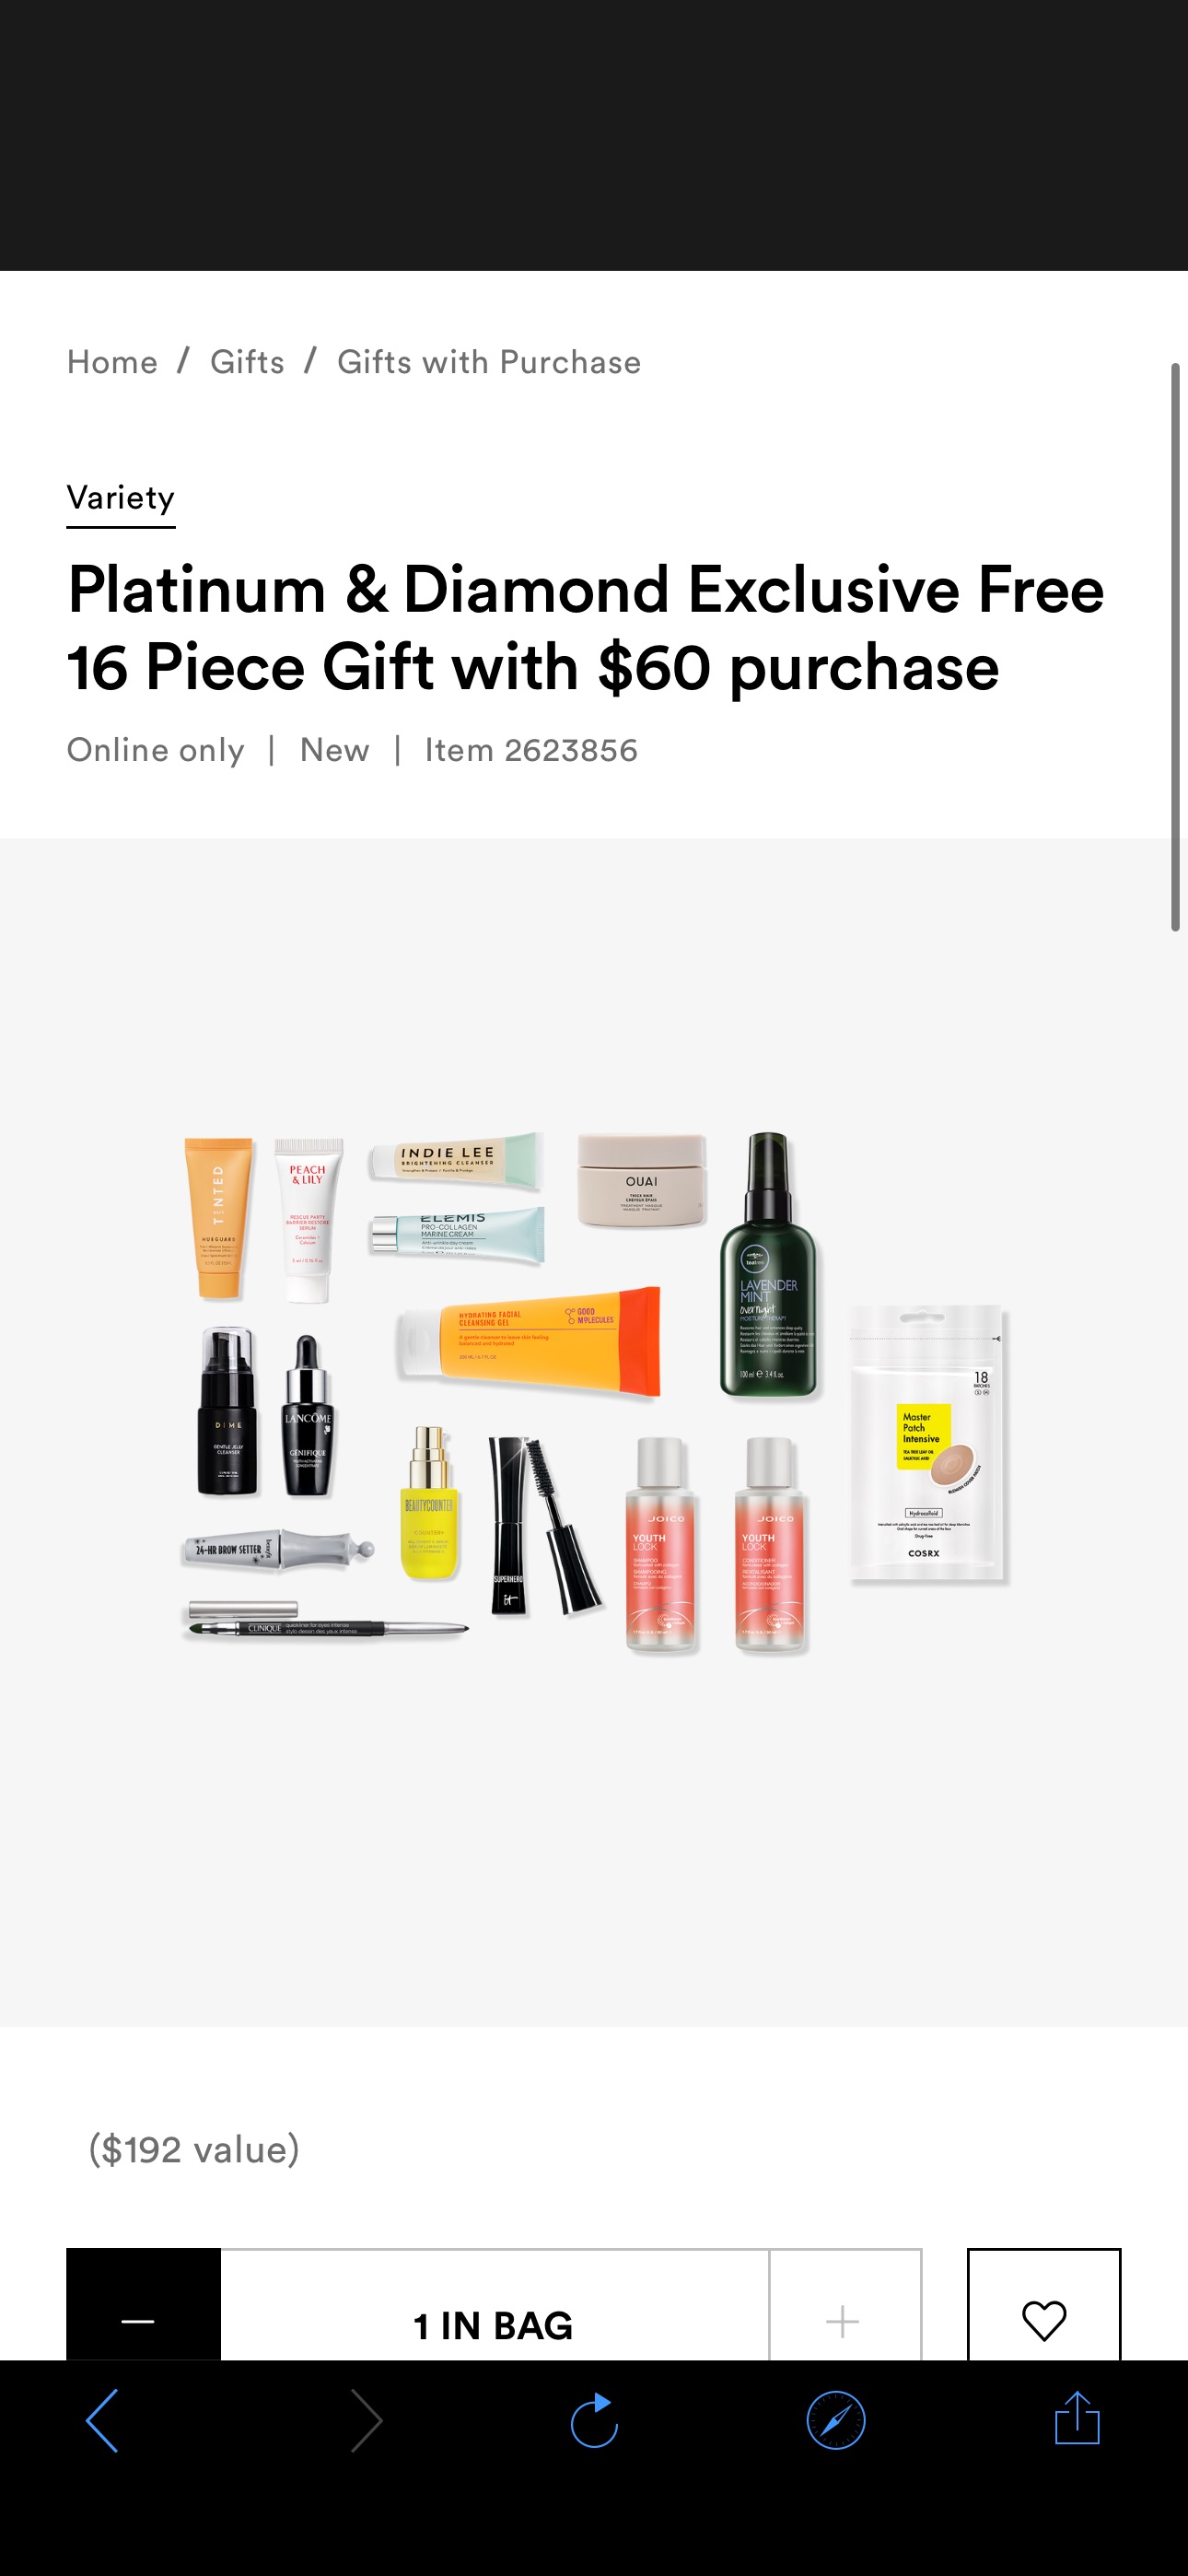 Platinum & Diamond Exclusive Free 16 Piece Gift with $60 purchase - Variety | Ulta Beauty